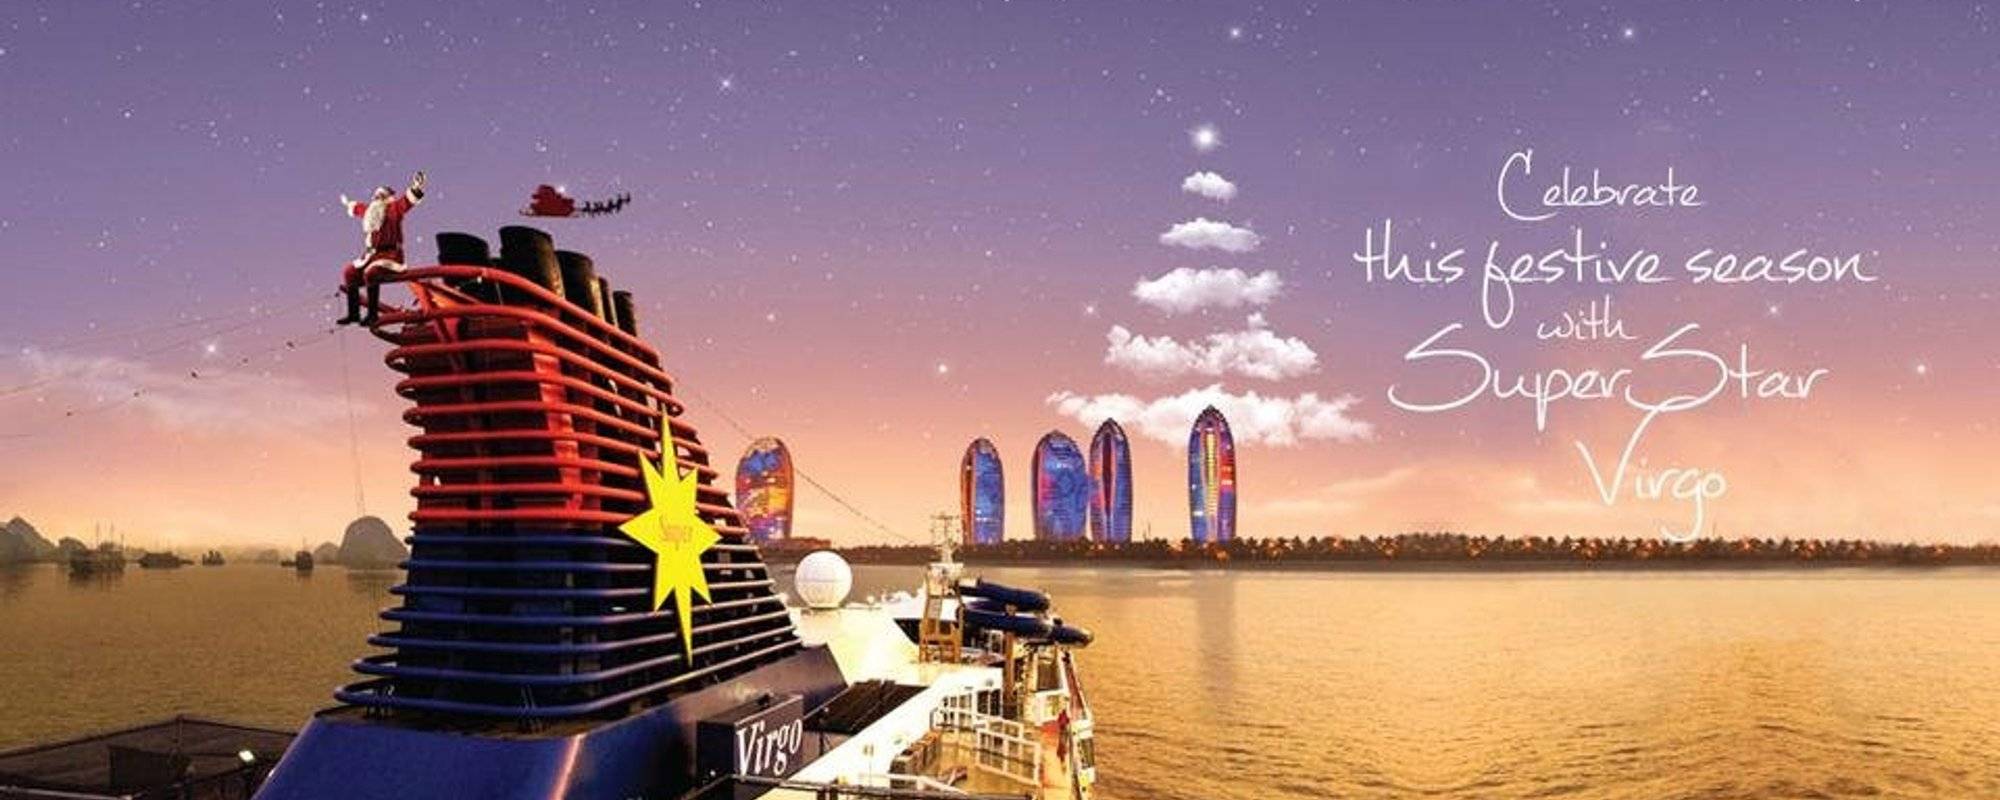 Star Cruises Super Star Virgo Review (Dec 4 - 9, 2018): 5 Nights is Not Enough